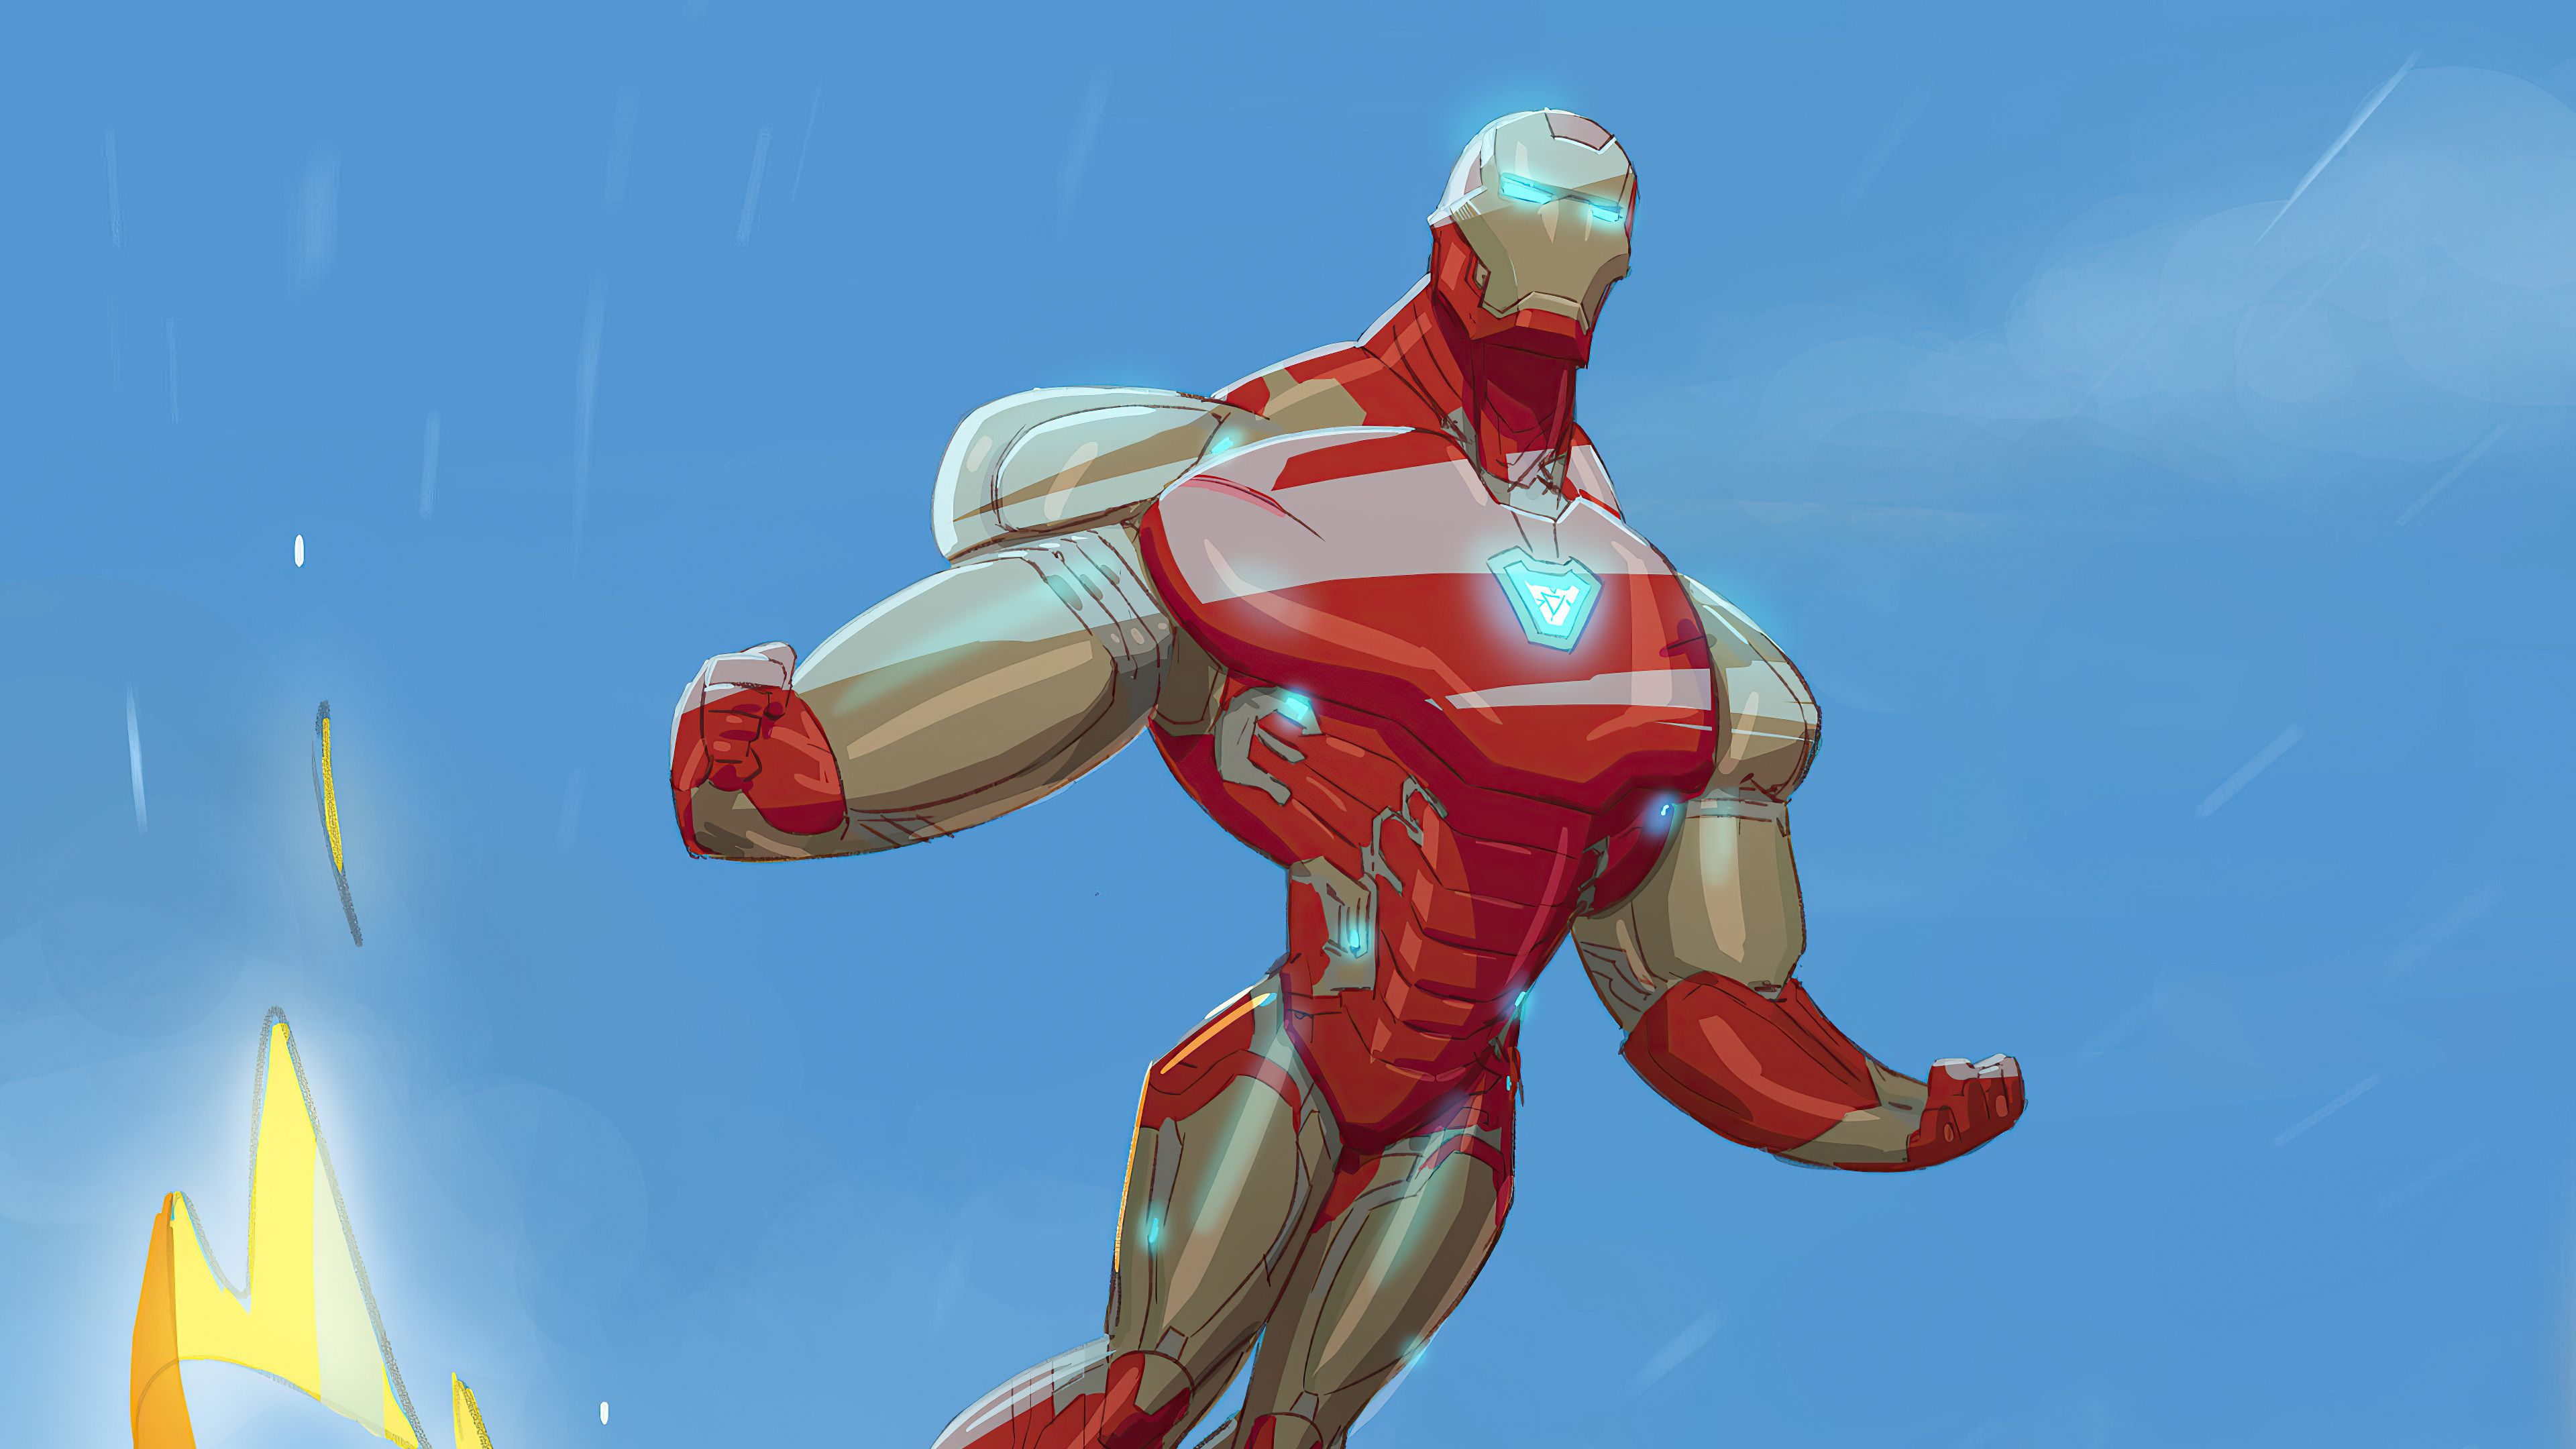 Iron Man Flying Hero, HD Superheroes, 4k Wallpaper, Image, Background, Photo and Picture